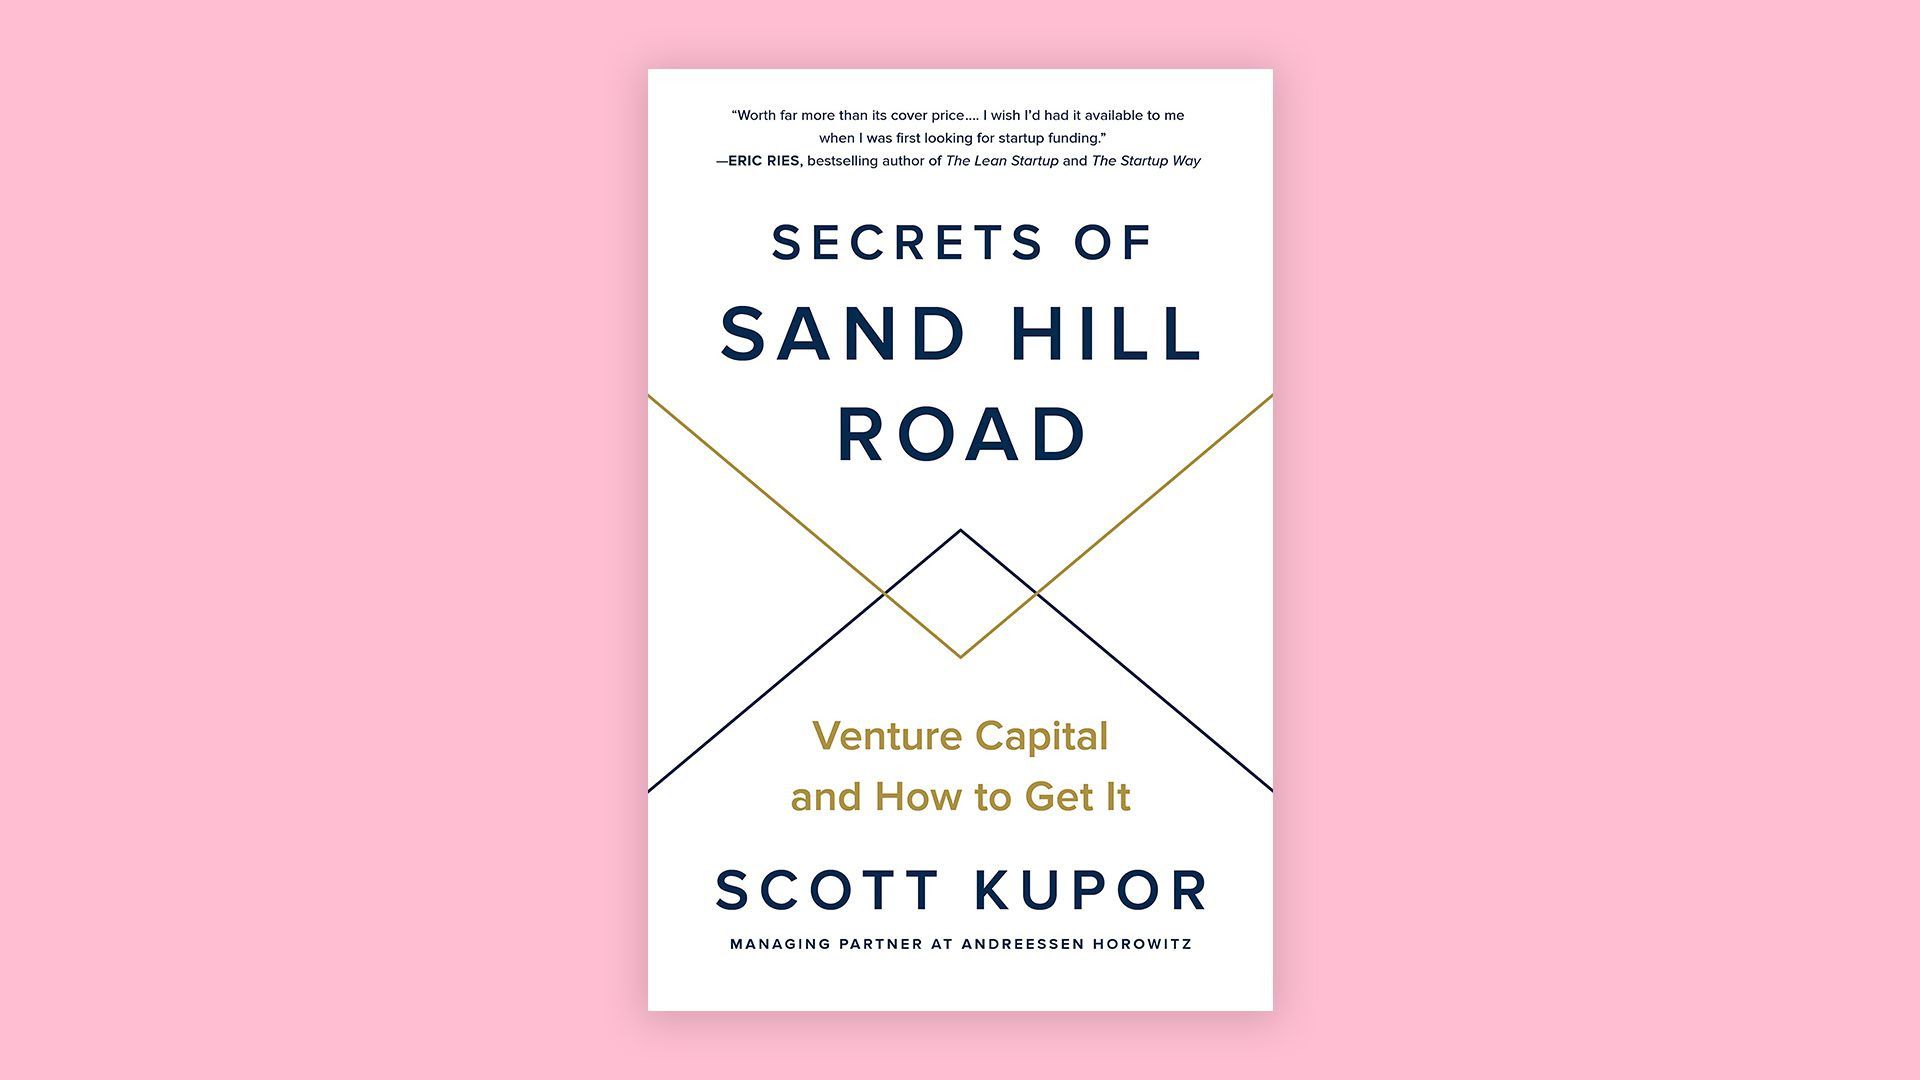 The cover of "Secrets of a Sand Hill Road"